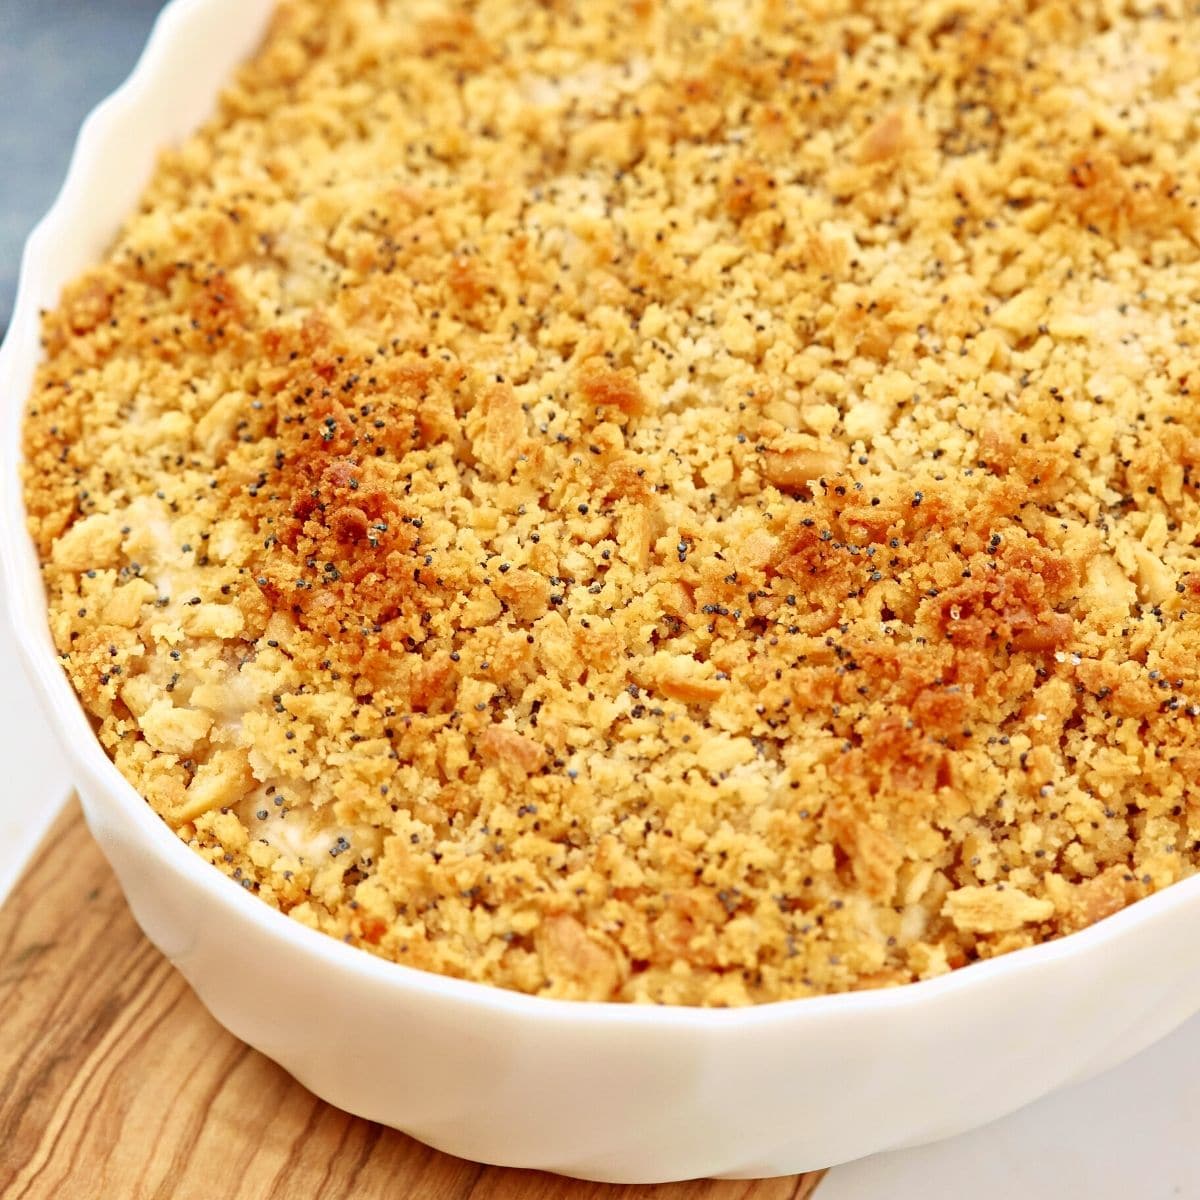 Freshly baked chicken poppy seed casserole in a white ceramic baking dish.